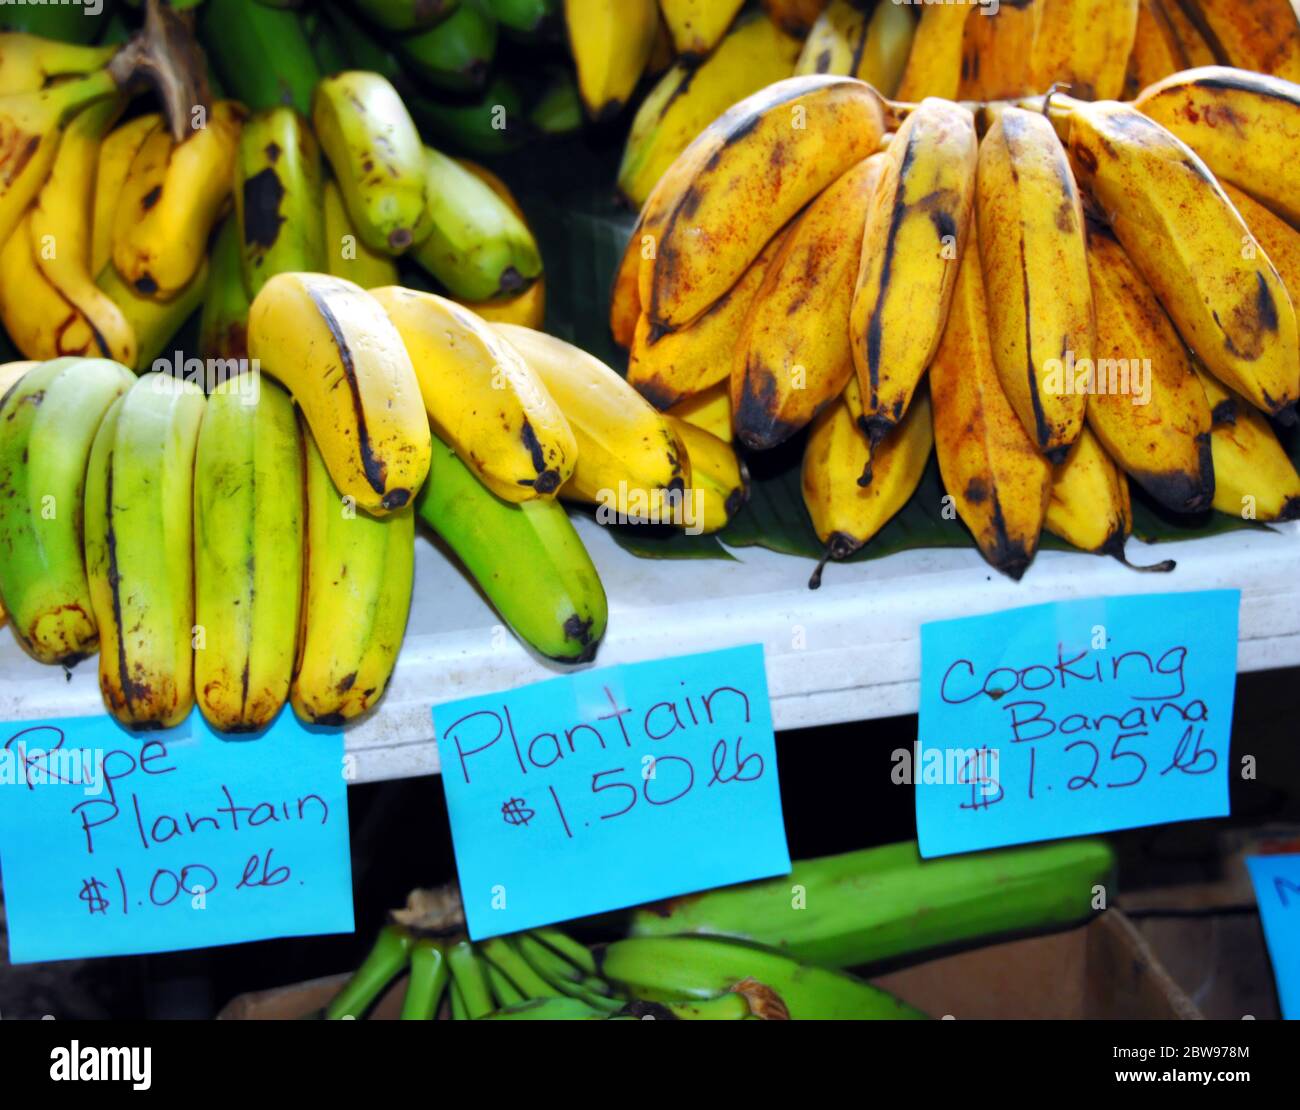 Banana varieties are ready for selling at the Hilo Farmers Market on the Big Island of Hawaii. Blue table signs list prices per pound. Stock Photo